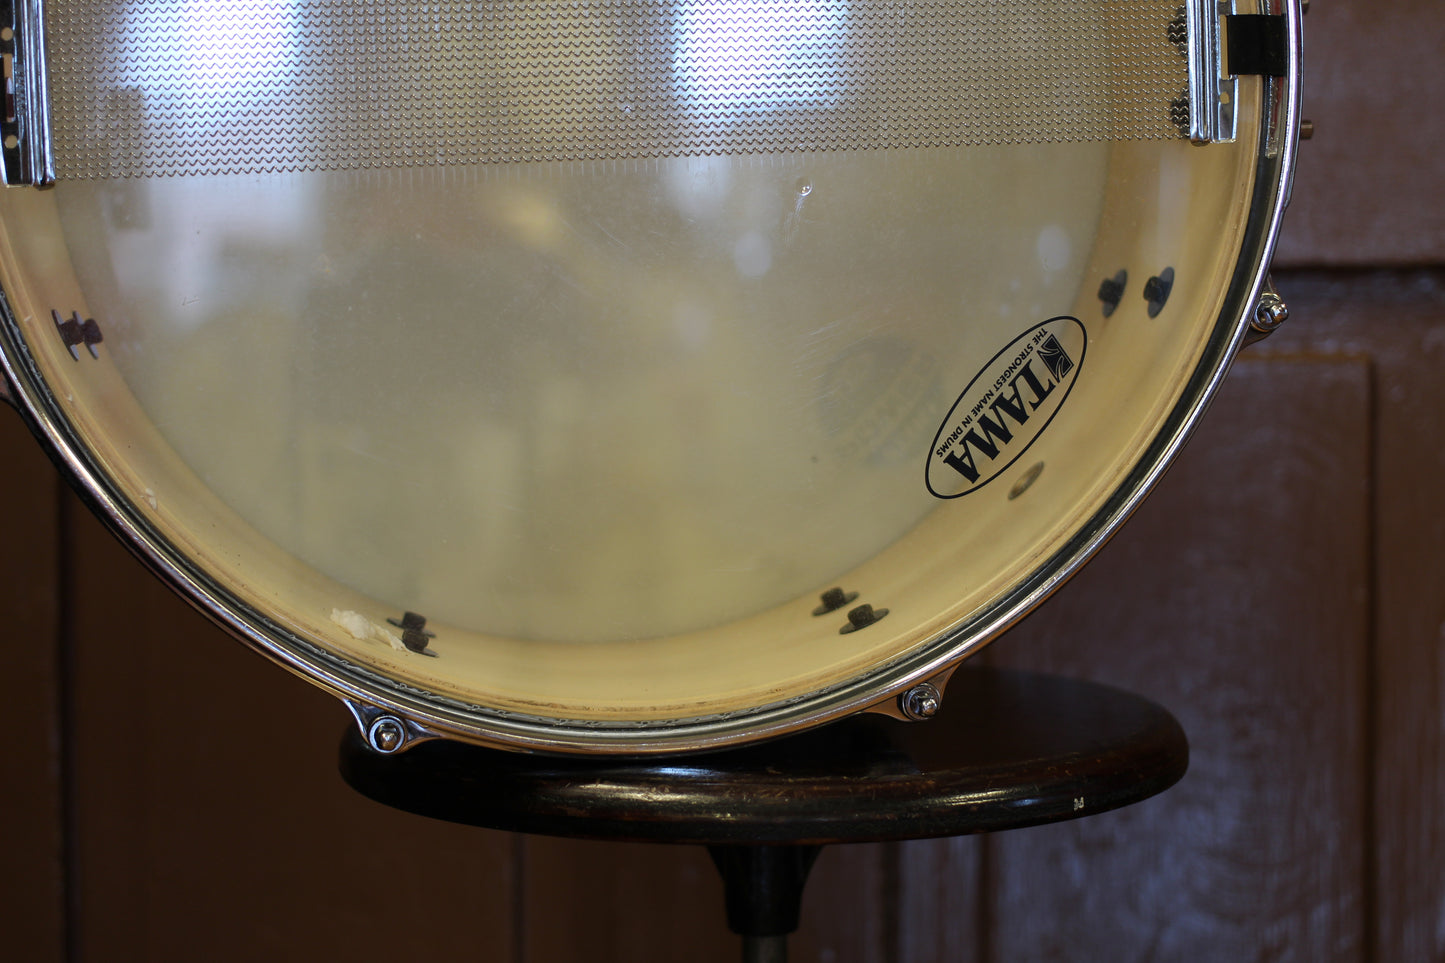 Used Tama Superstar Hyperdrive 5"x14" Snare Drum in White Satin Flame